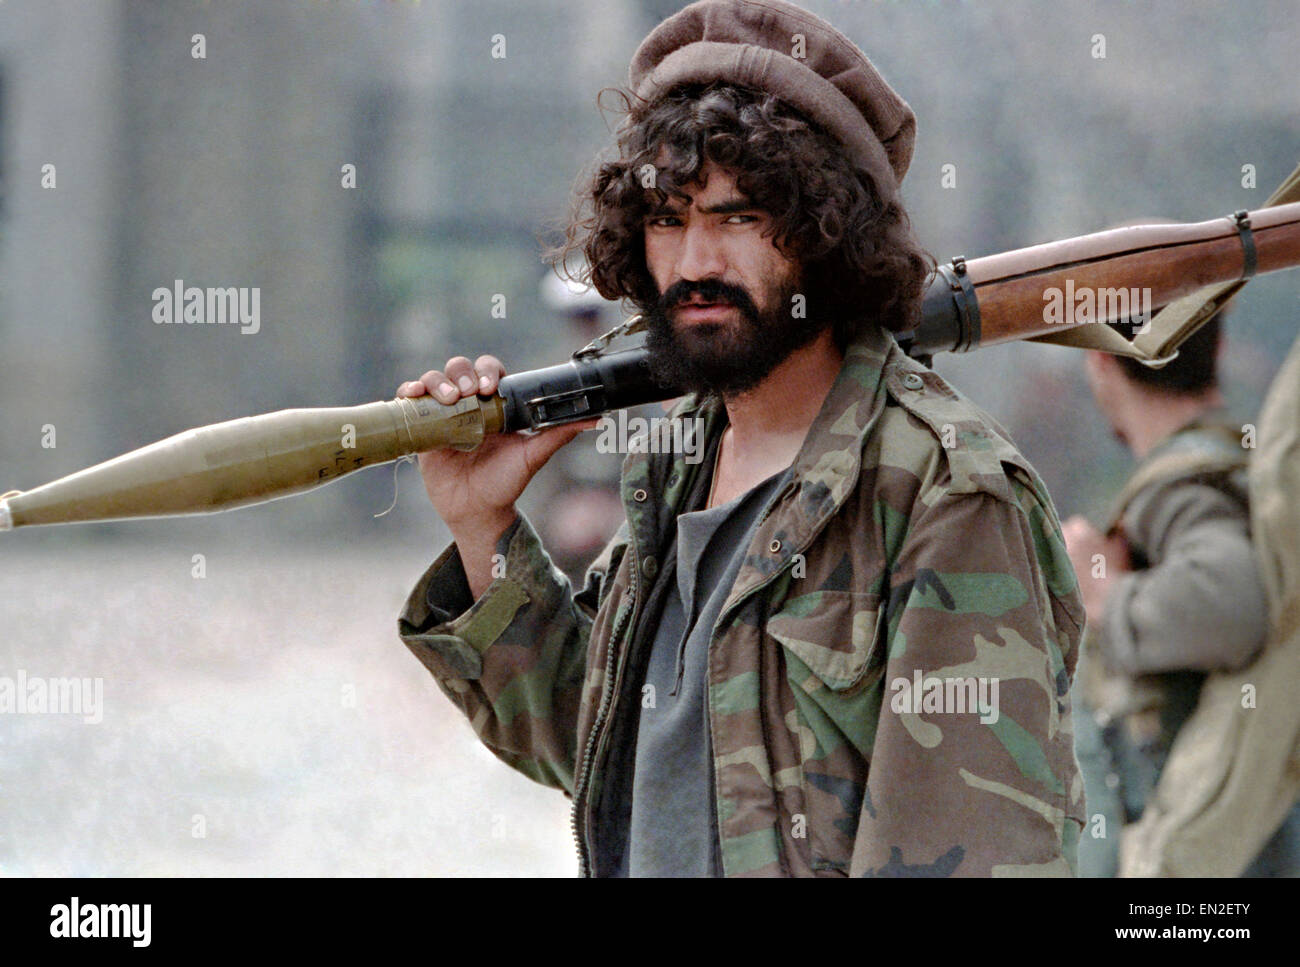 An Afghan mujahideen fighter with Jamayat-E-Islami carries a shoulder fired Rocket-propelled grenade during fighting against Hezb-i Islami forces following the fall of the capital April 19, 1992 in Kabul, Afghanistan. Fighting between mujahideen factions began almost immediately after they captured the city. Stock Photo